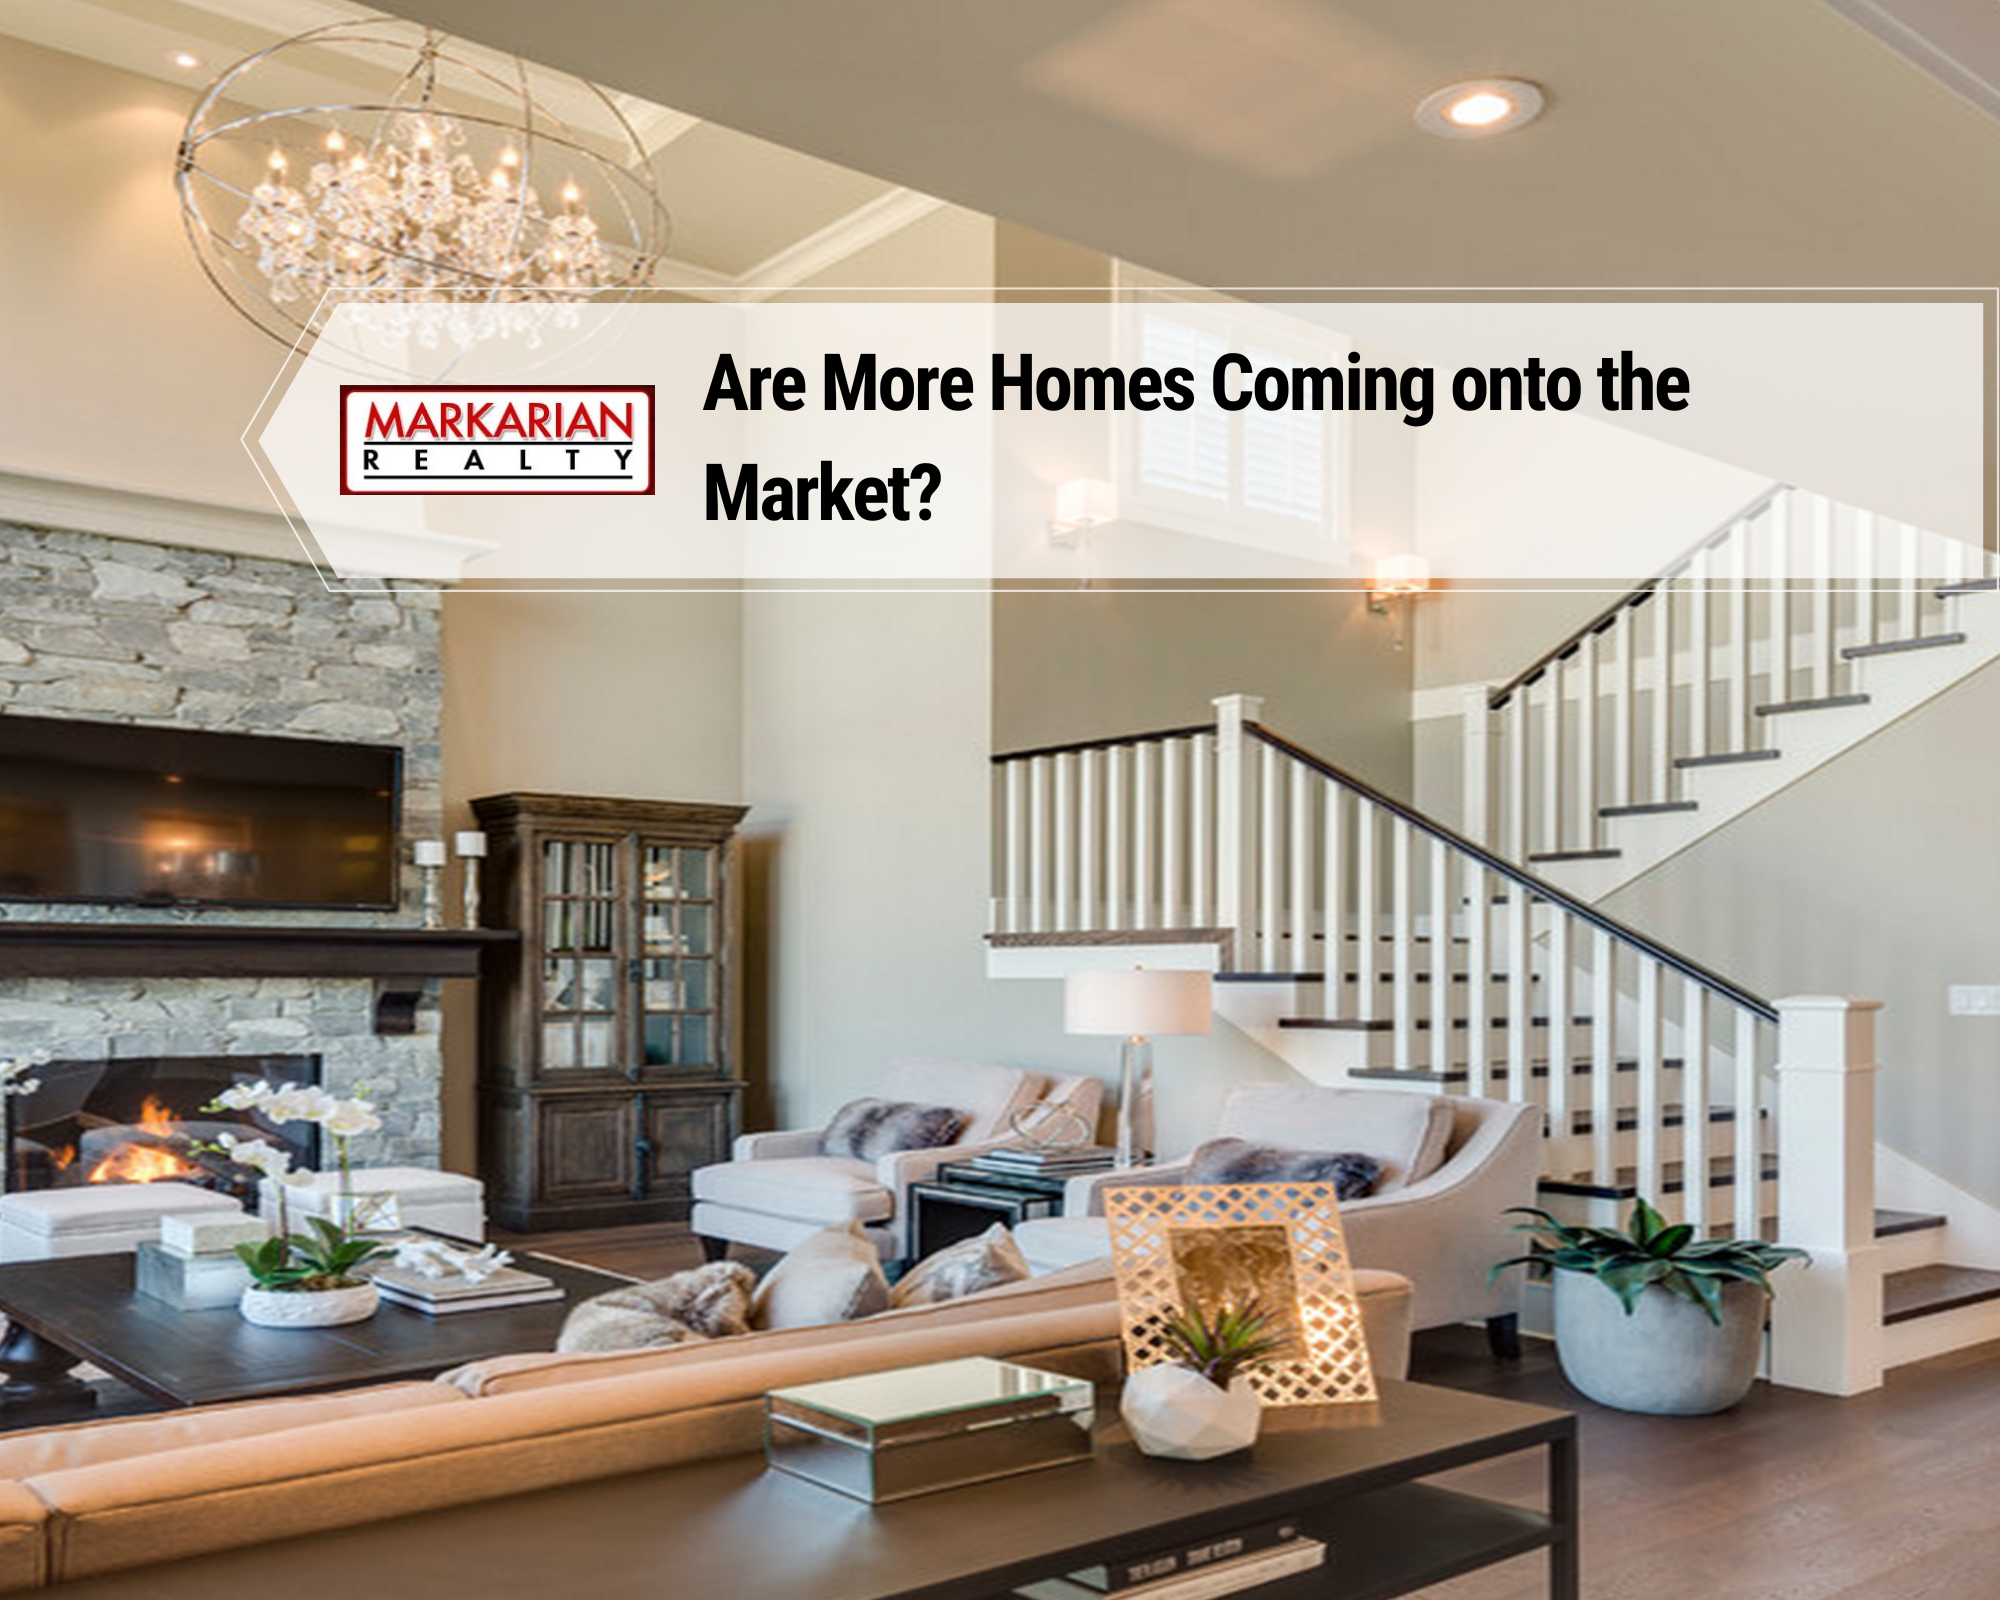 Are More Homes Coming onto the Market?